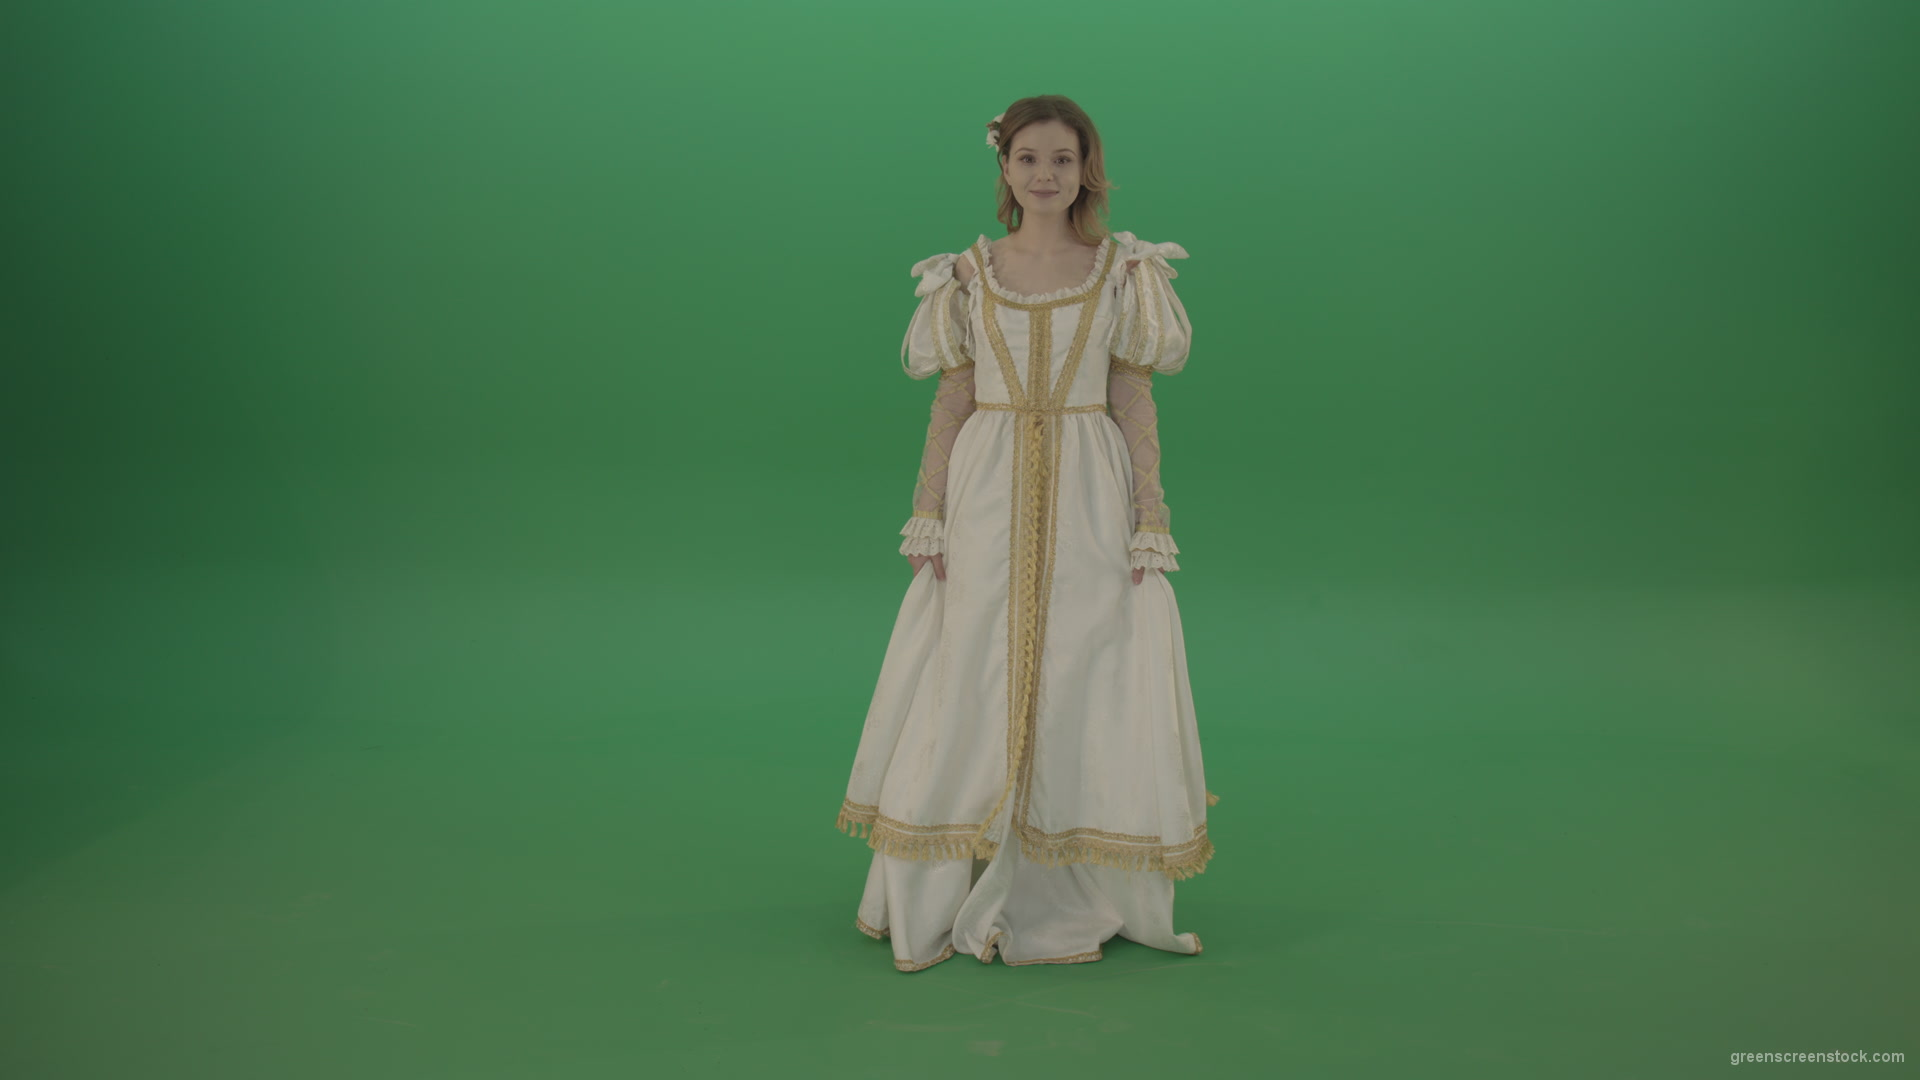 Easy-bowed-girl-is-happy-to-meet-isolated-on-green-screen_001 Green Screen Stock